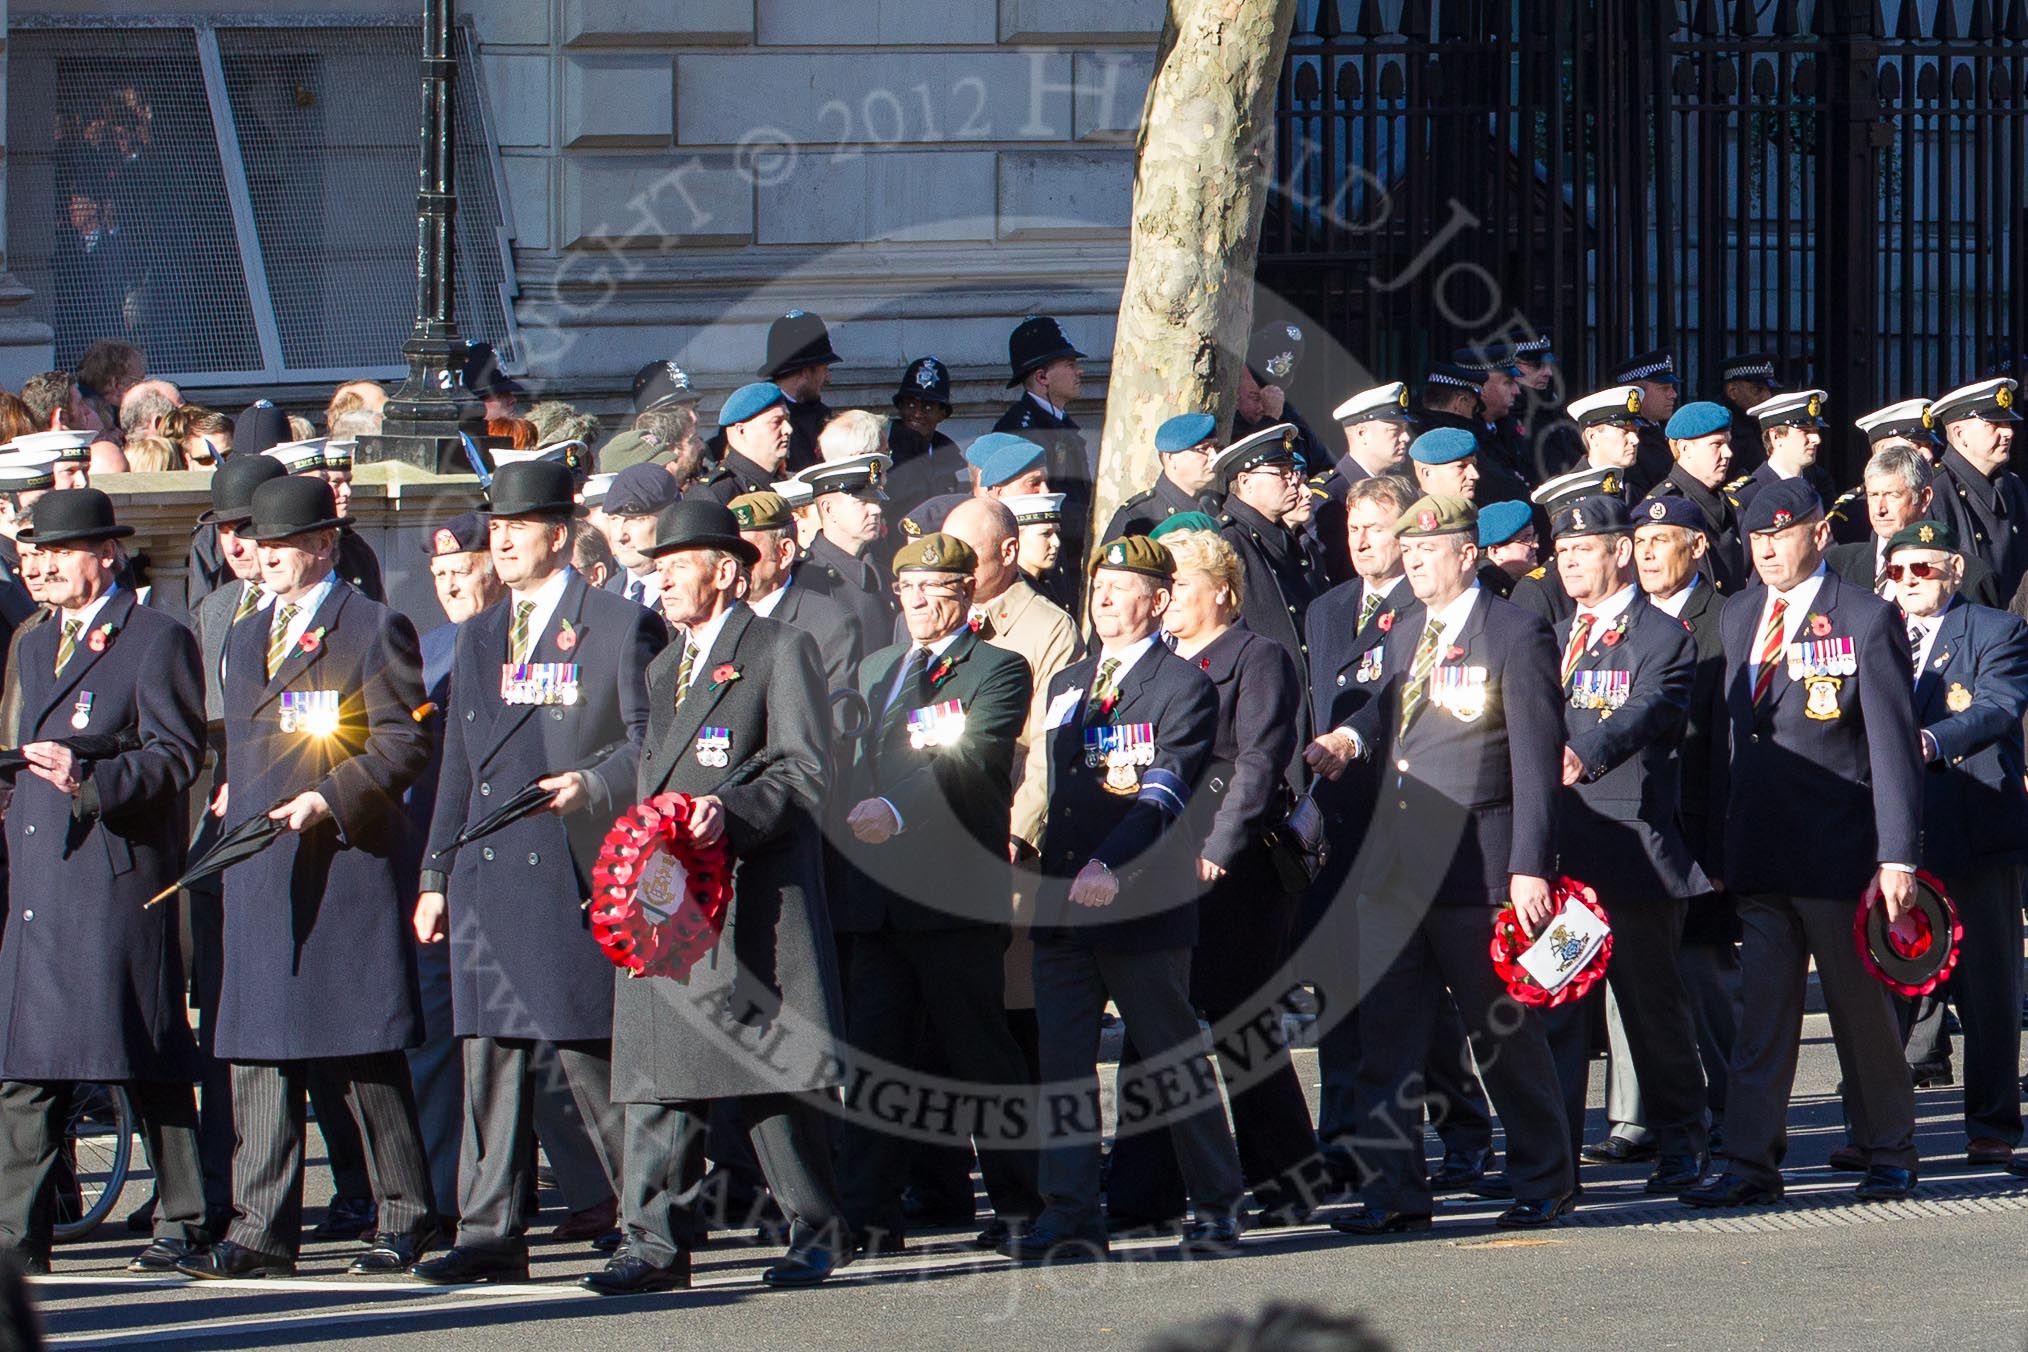 Remembrance Sunday 2012 Cenotaph March Past: Group A7 - Royal Northumberland Fusiliers, A8 - 
The Duke of Lancaster's Regimental Association, and A9 - Green Howards Association..
Whitehall, Cenotaph,
London SW1,

United Kingdom,
on 11 November 2012 at 11:49, image #598